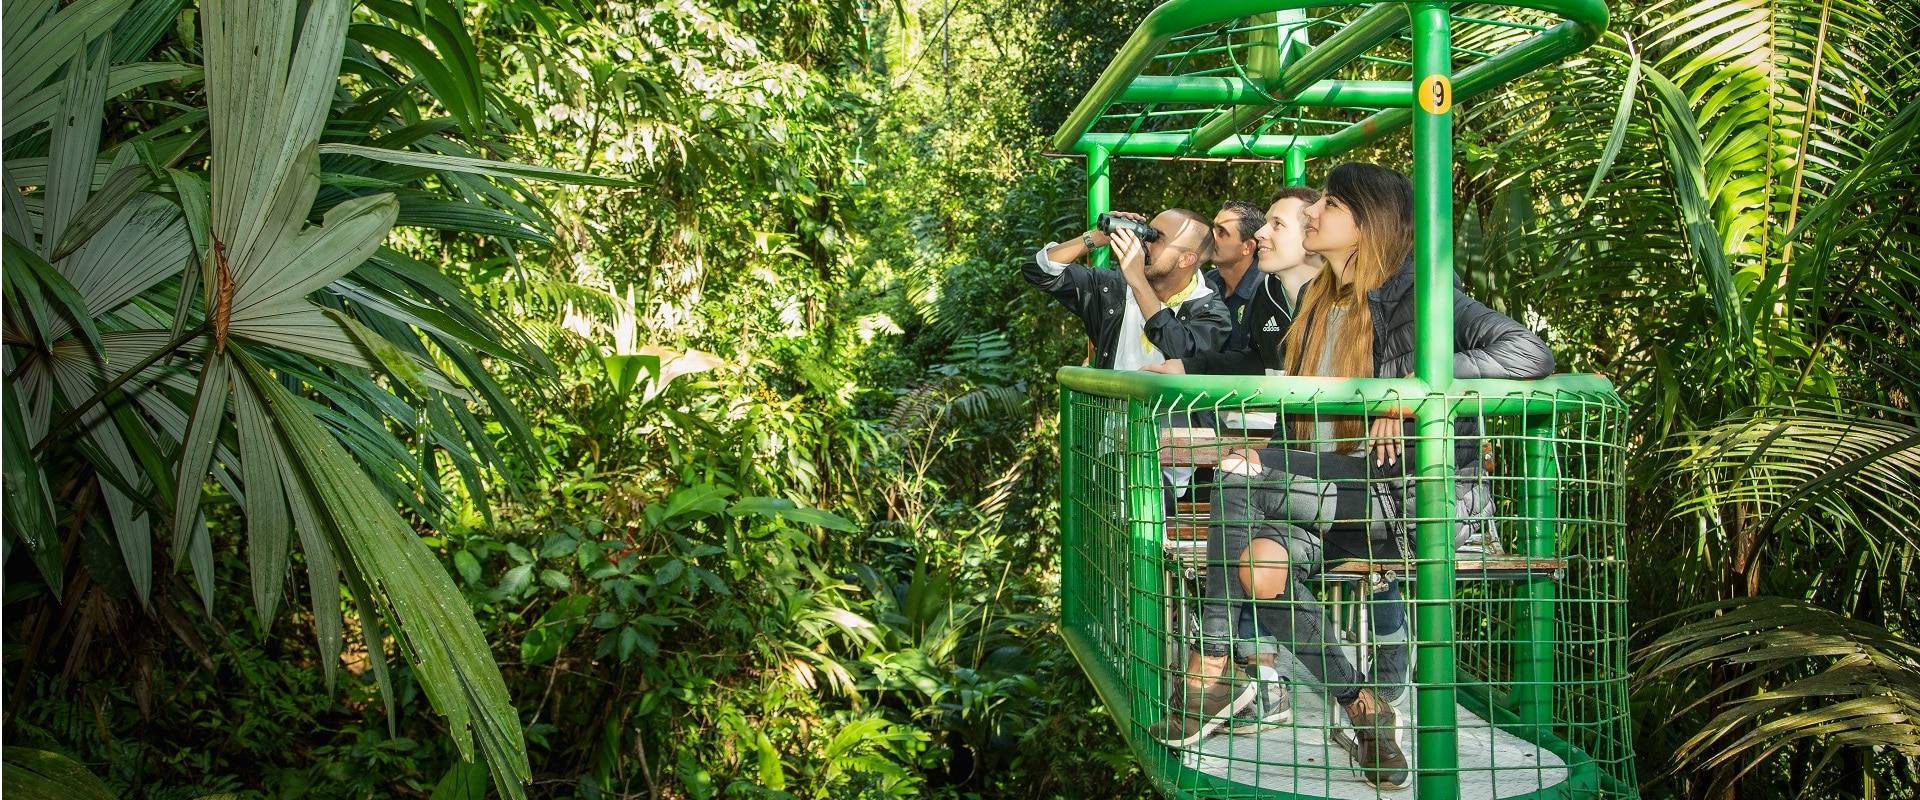 Rain Forest Aerial Tram tour from San Jose